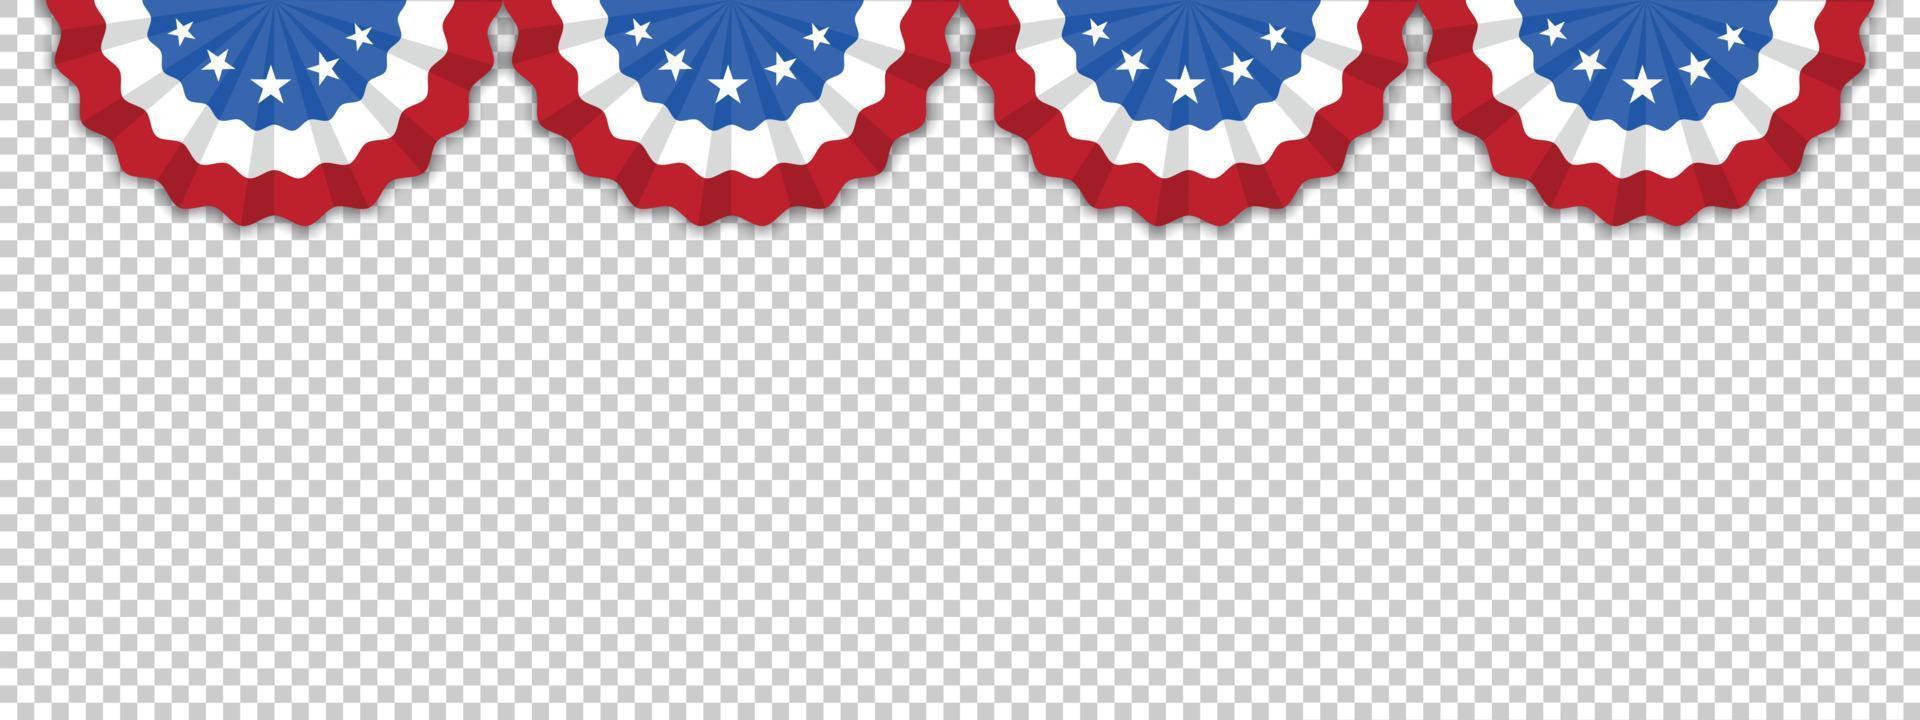 Four US Flag  isolated on transparent background with room for your text. Illustrator Vector Eps 10.